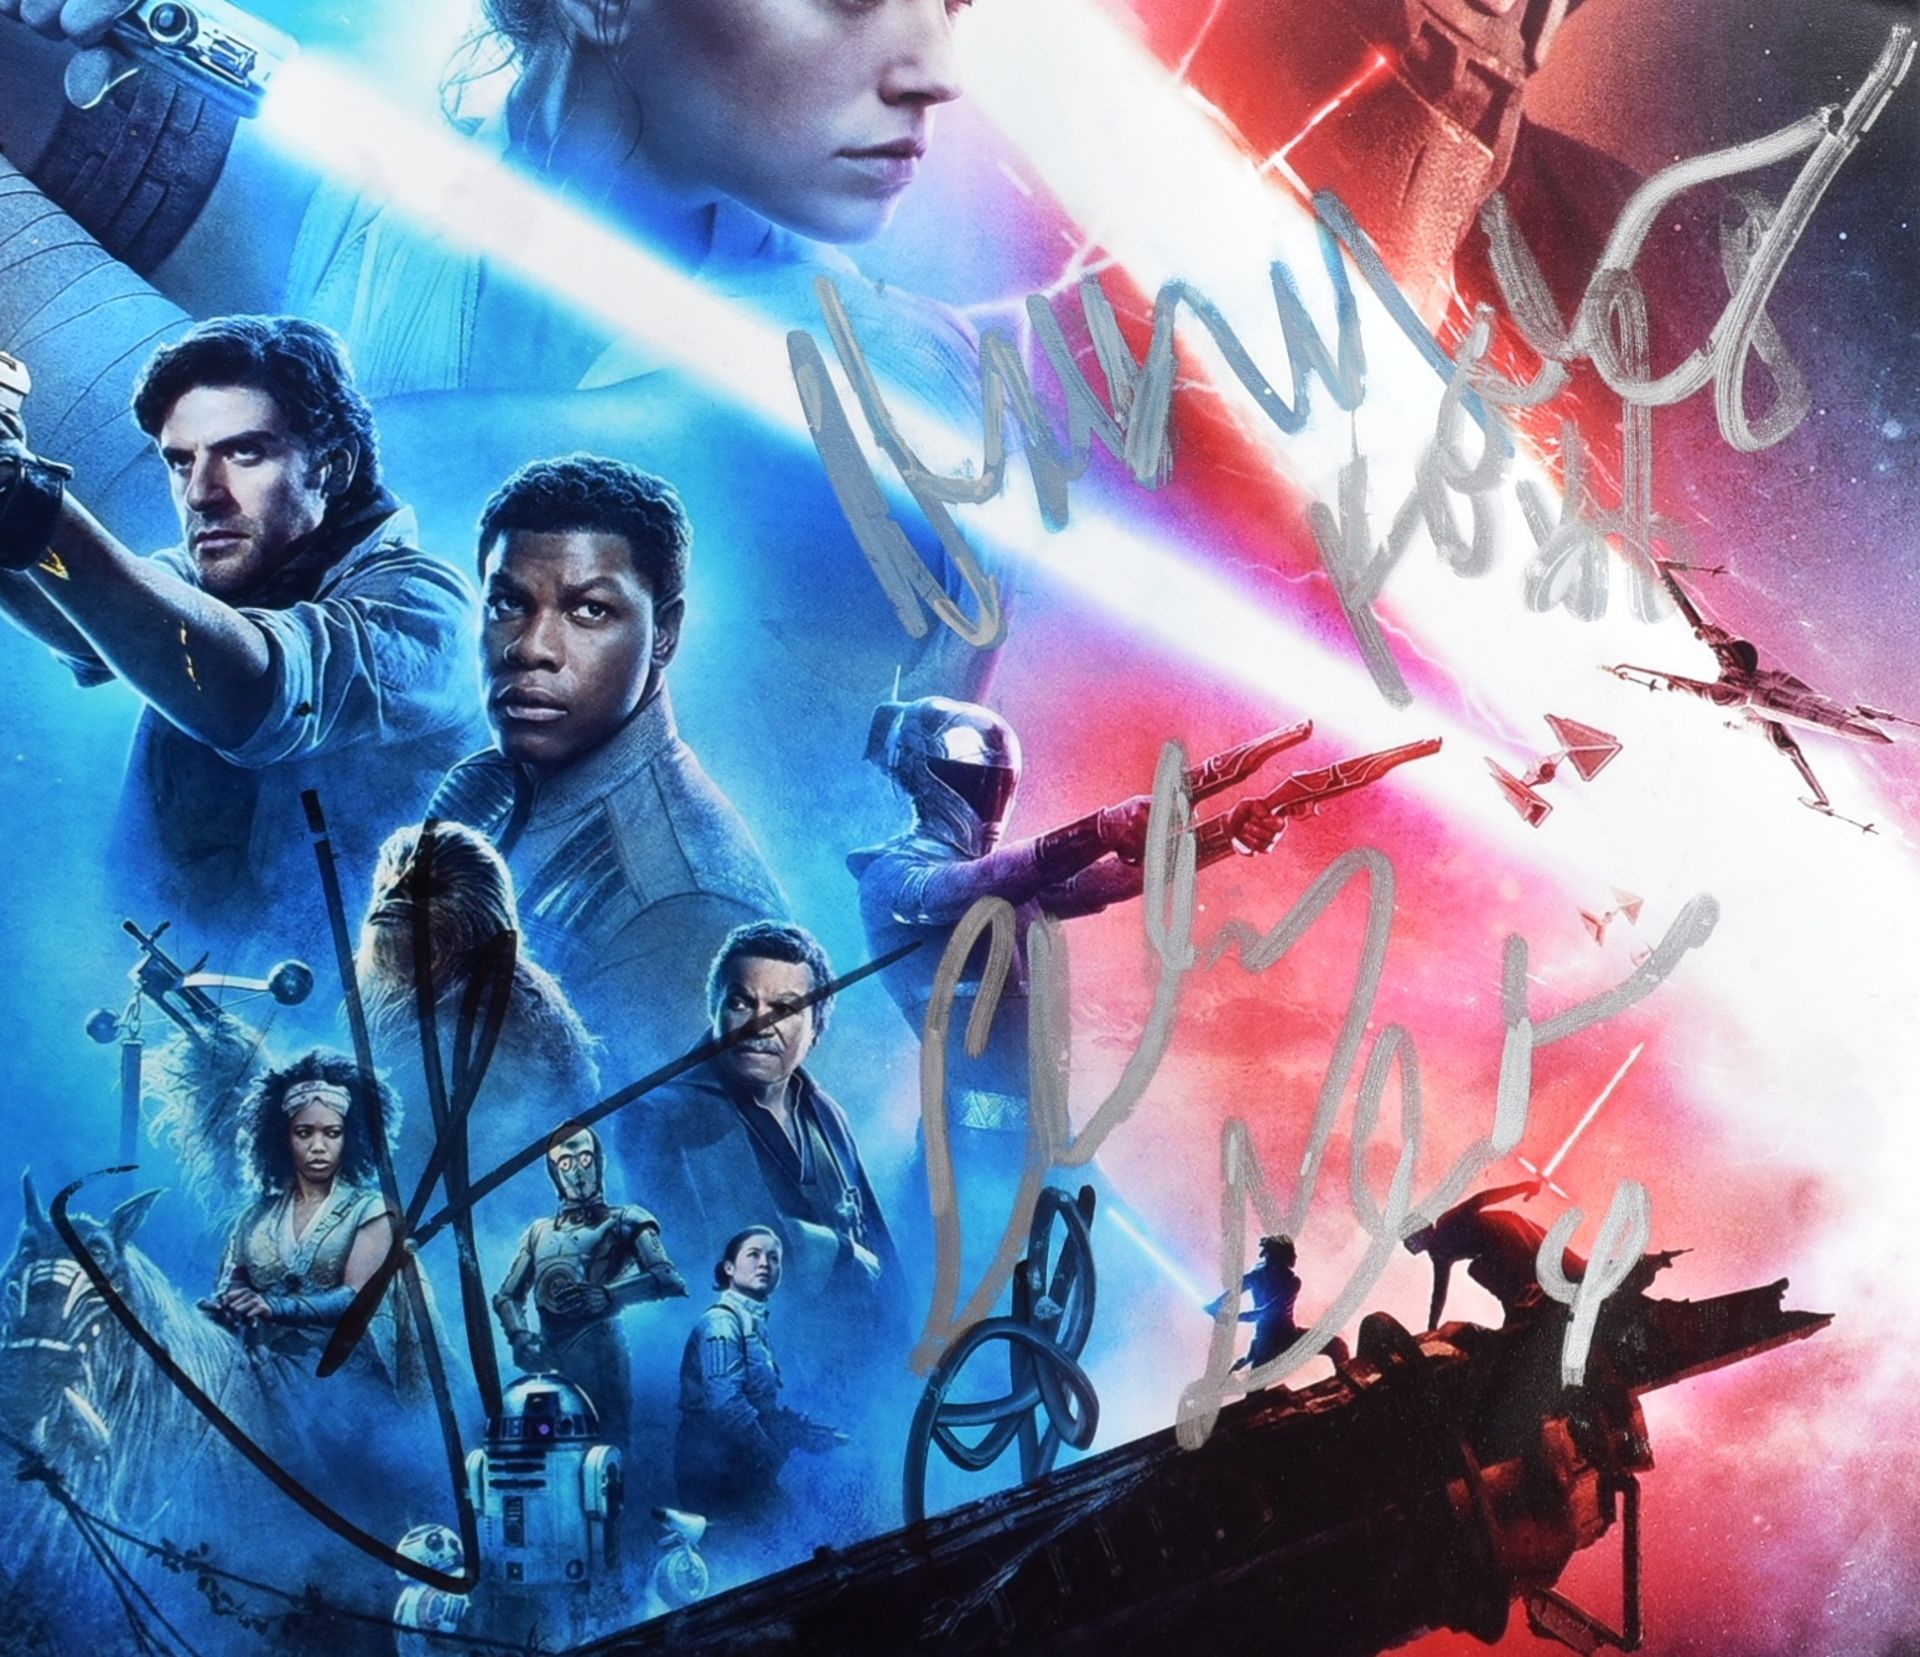 STAR WARS - RISE OF SKYWALKER - MULTI-SIGNED 12X8" POSTER PHOTO - Image 3 of 4